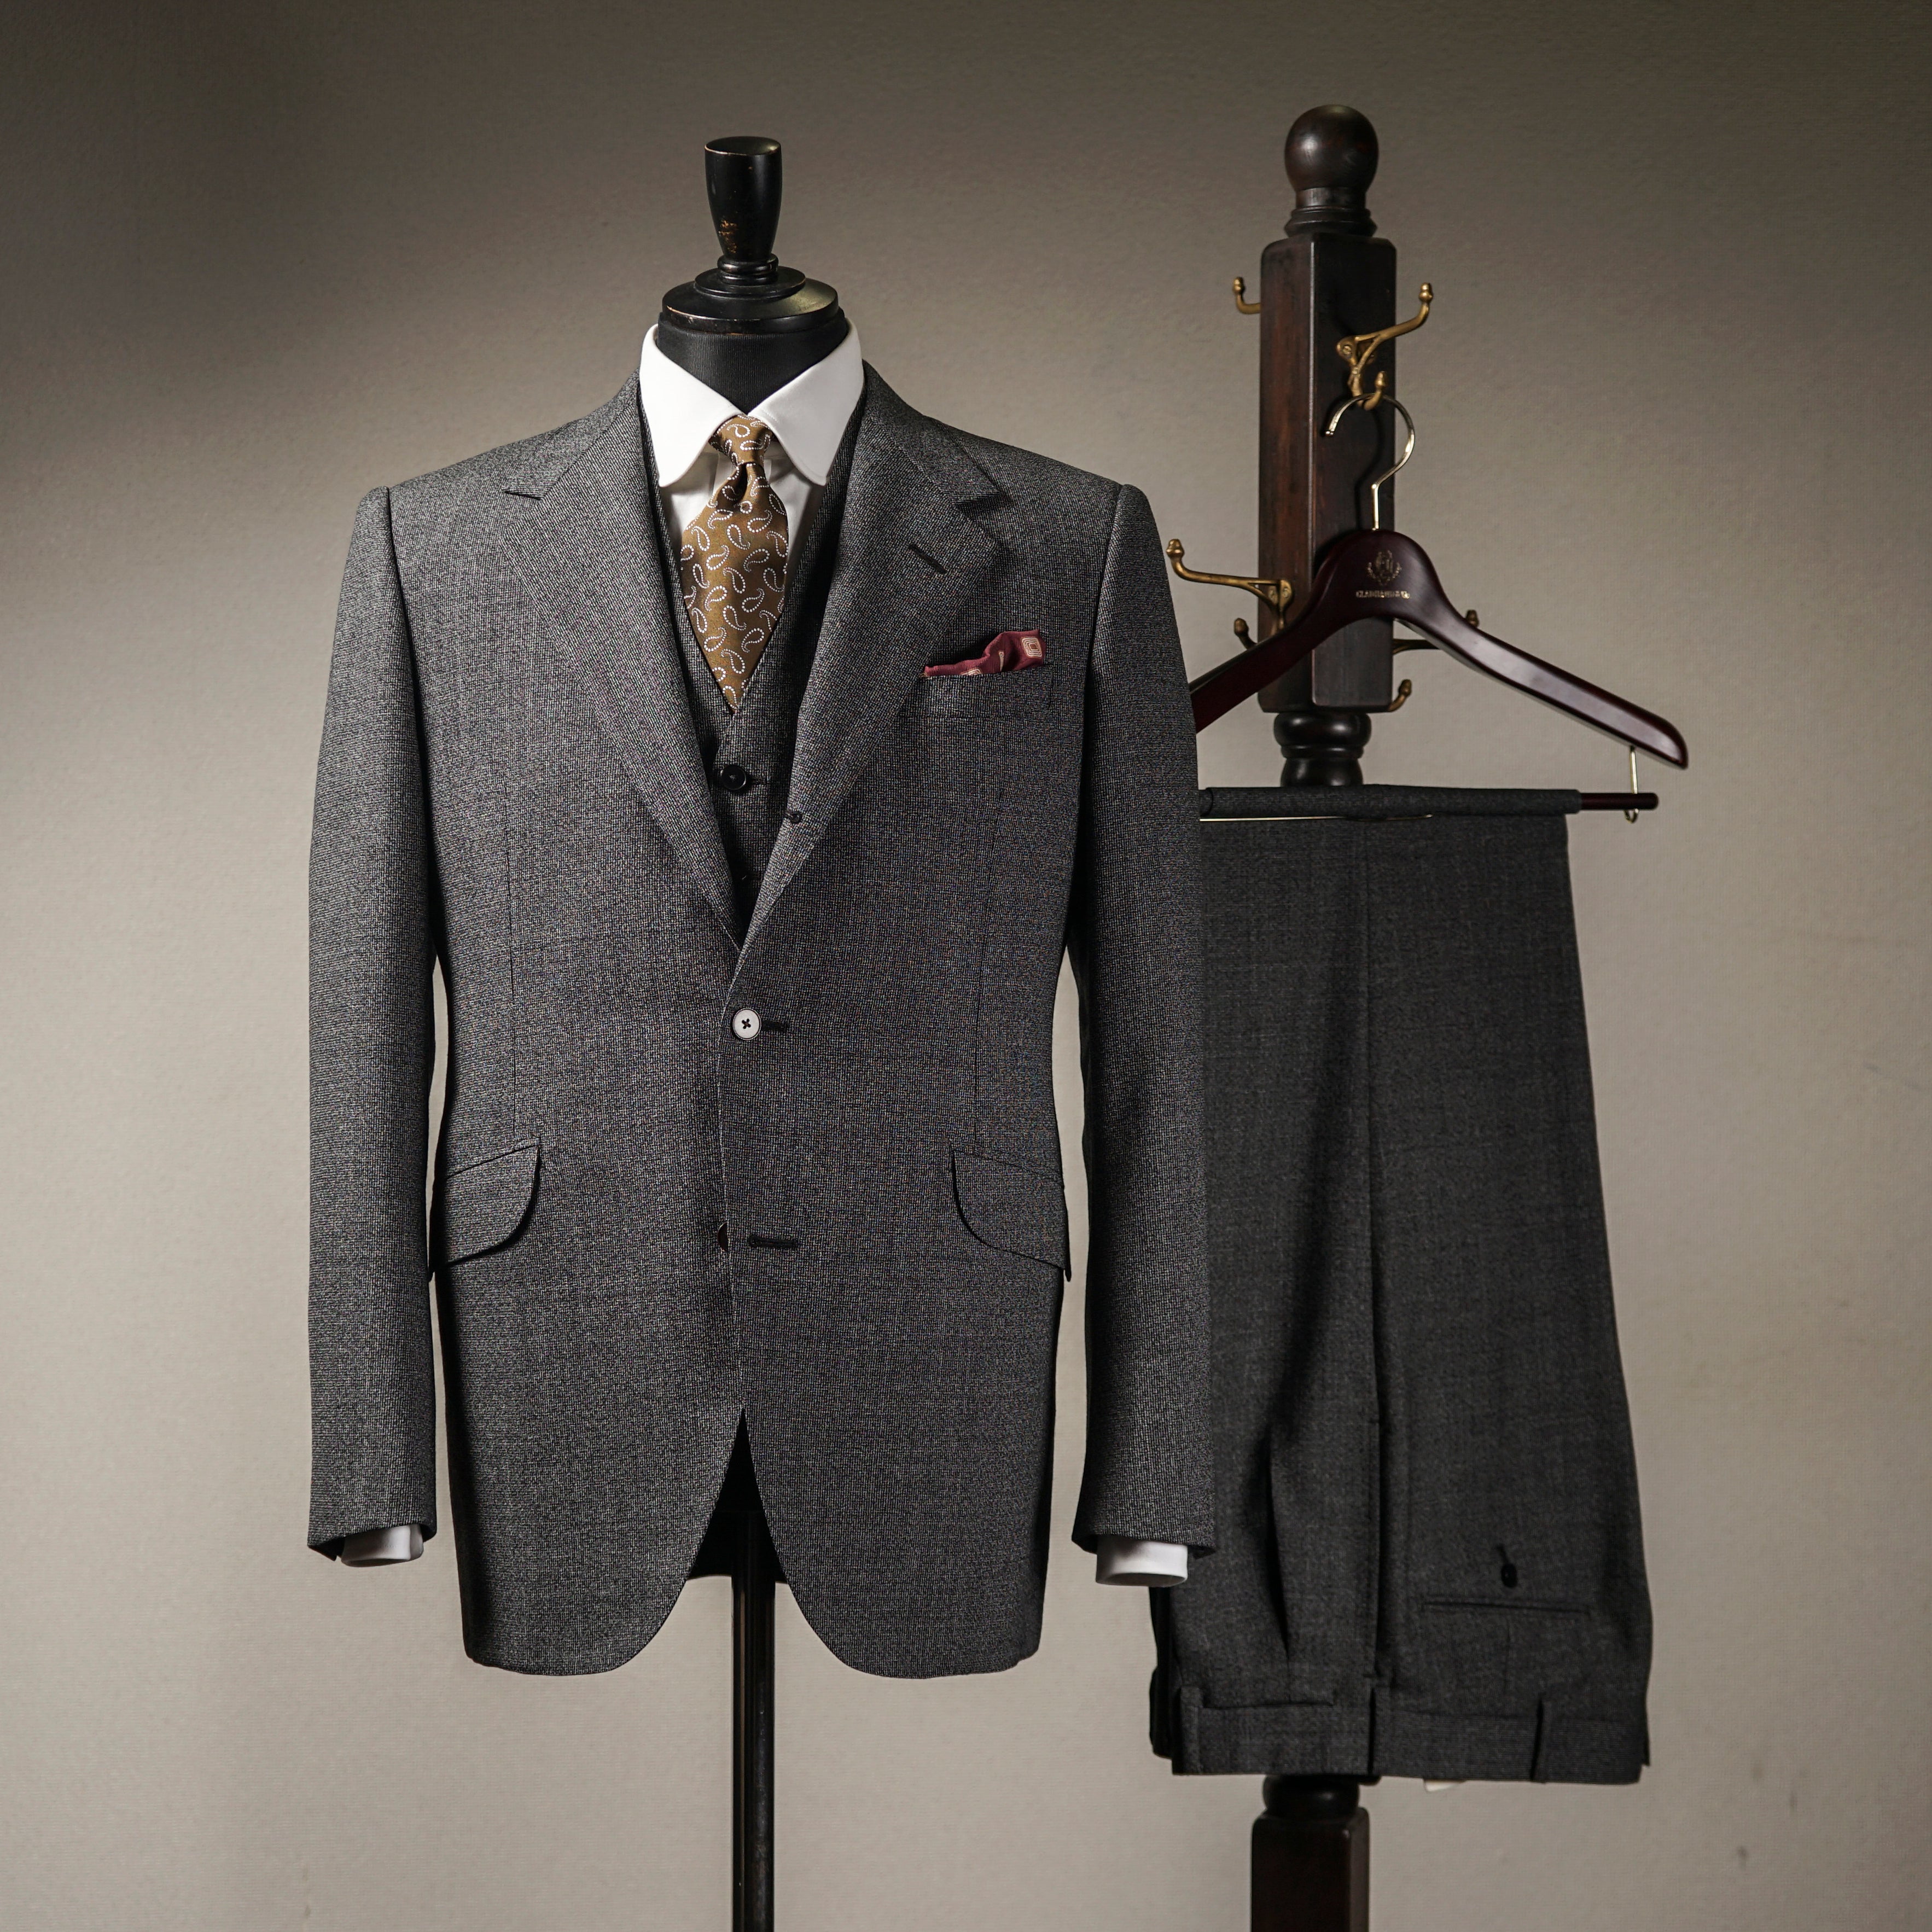 TAILORED – GLADHAND & Co.